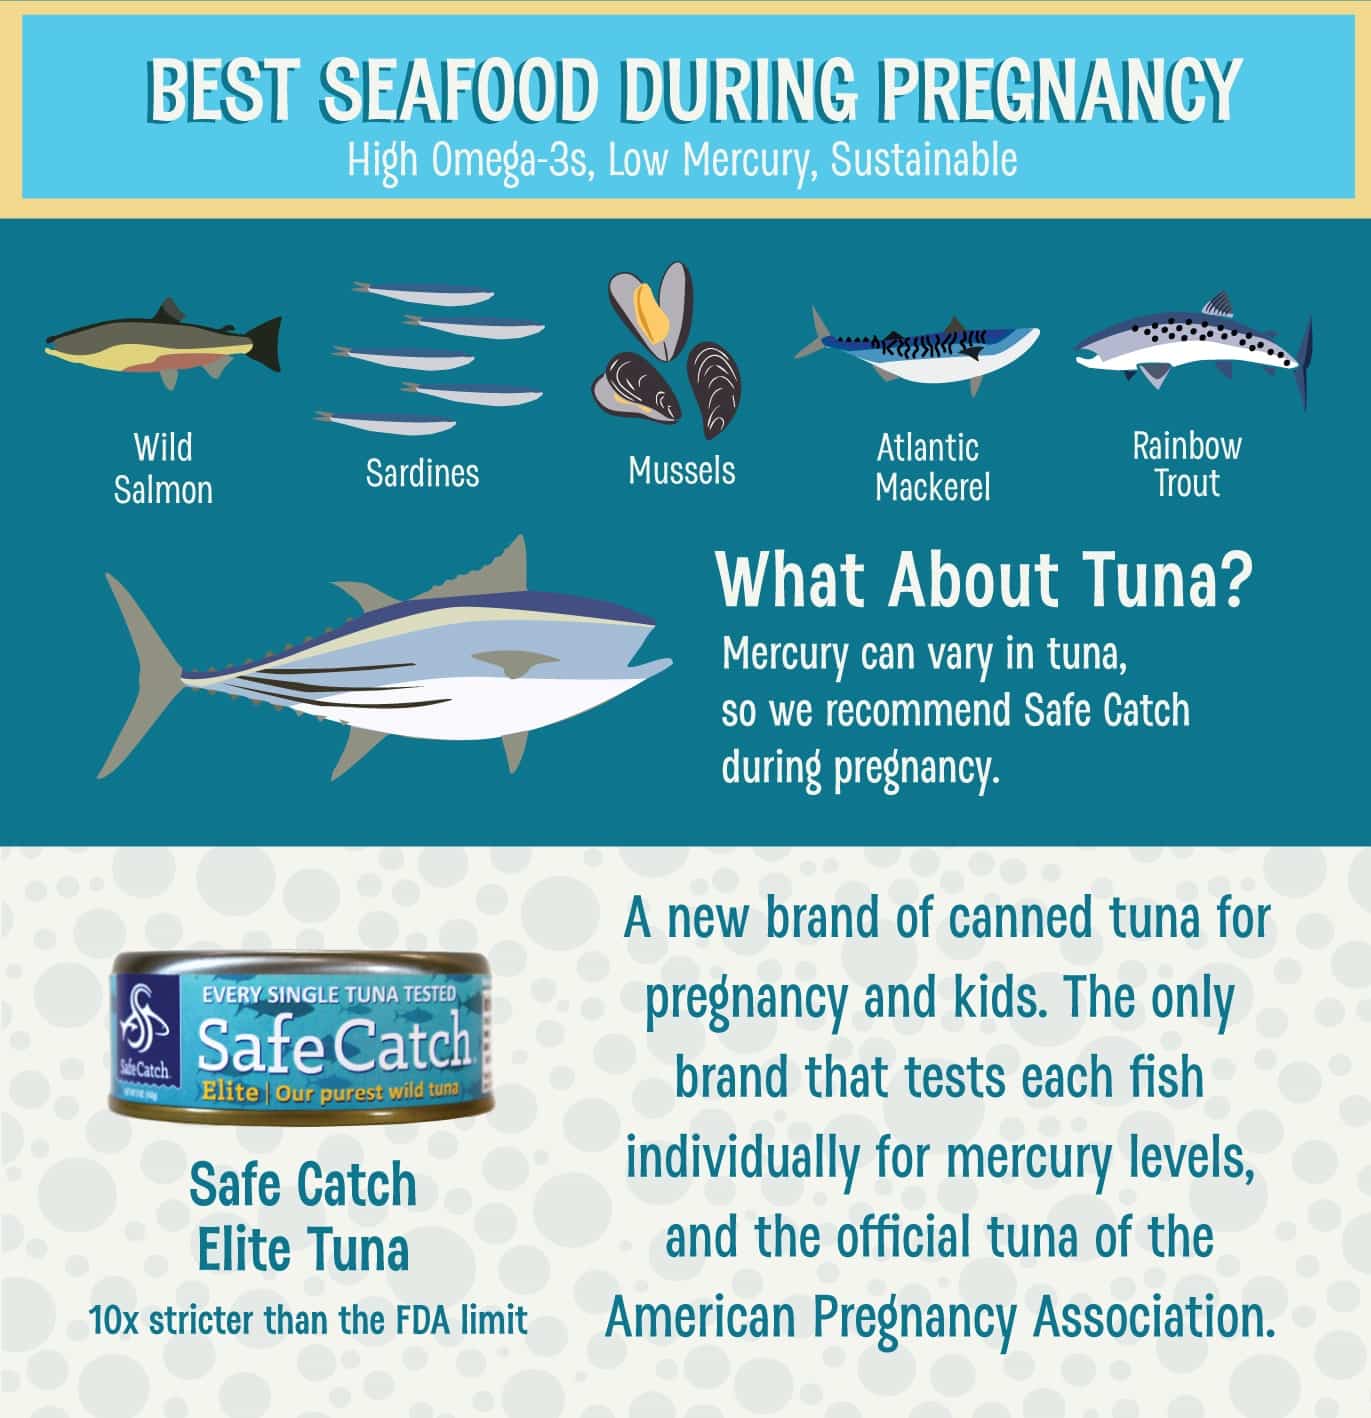 Eating Seafood During Pregnancy